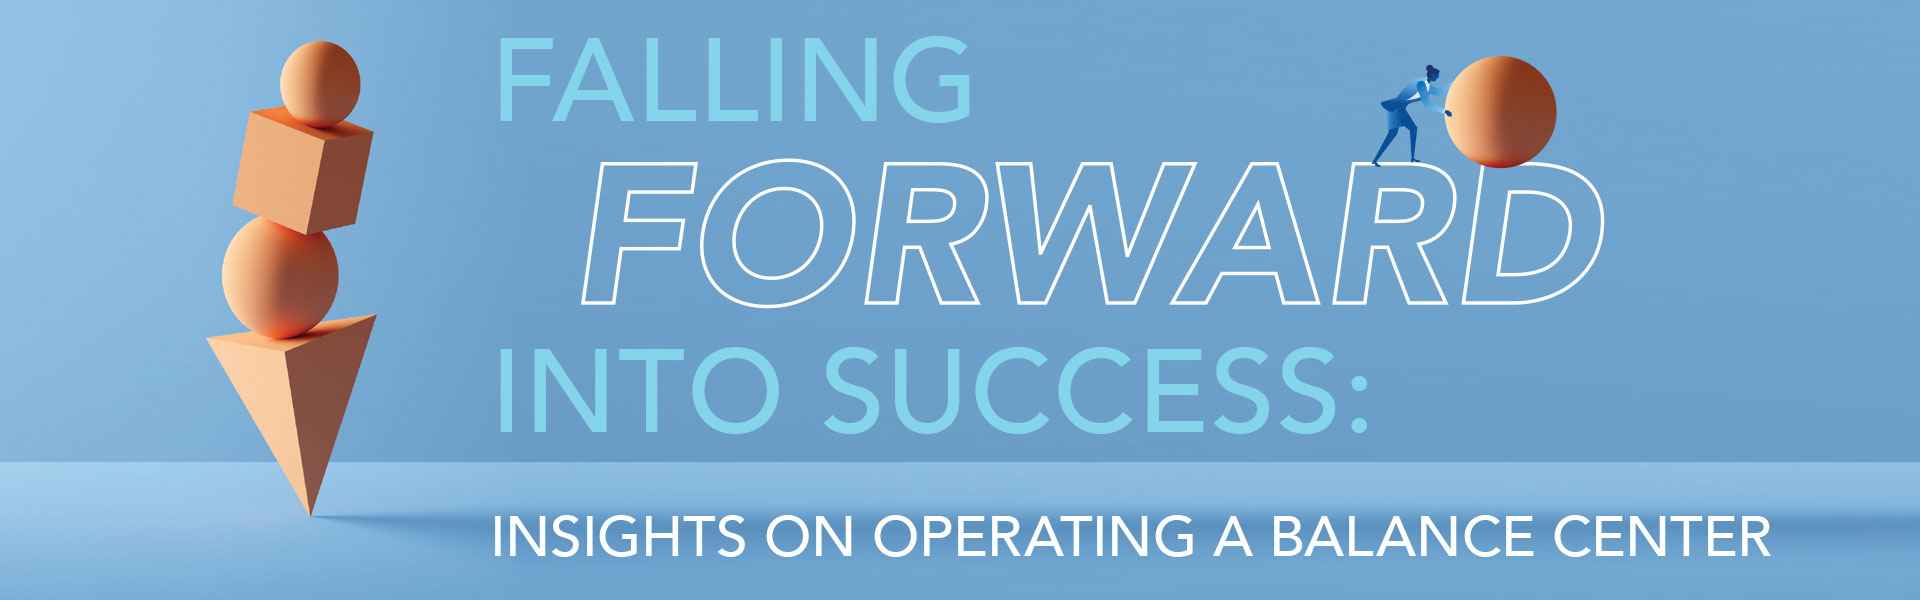 Falling Forward Into Success: Insights on Operating a Balance Center